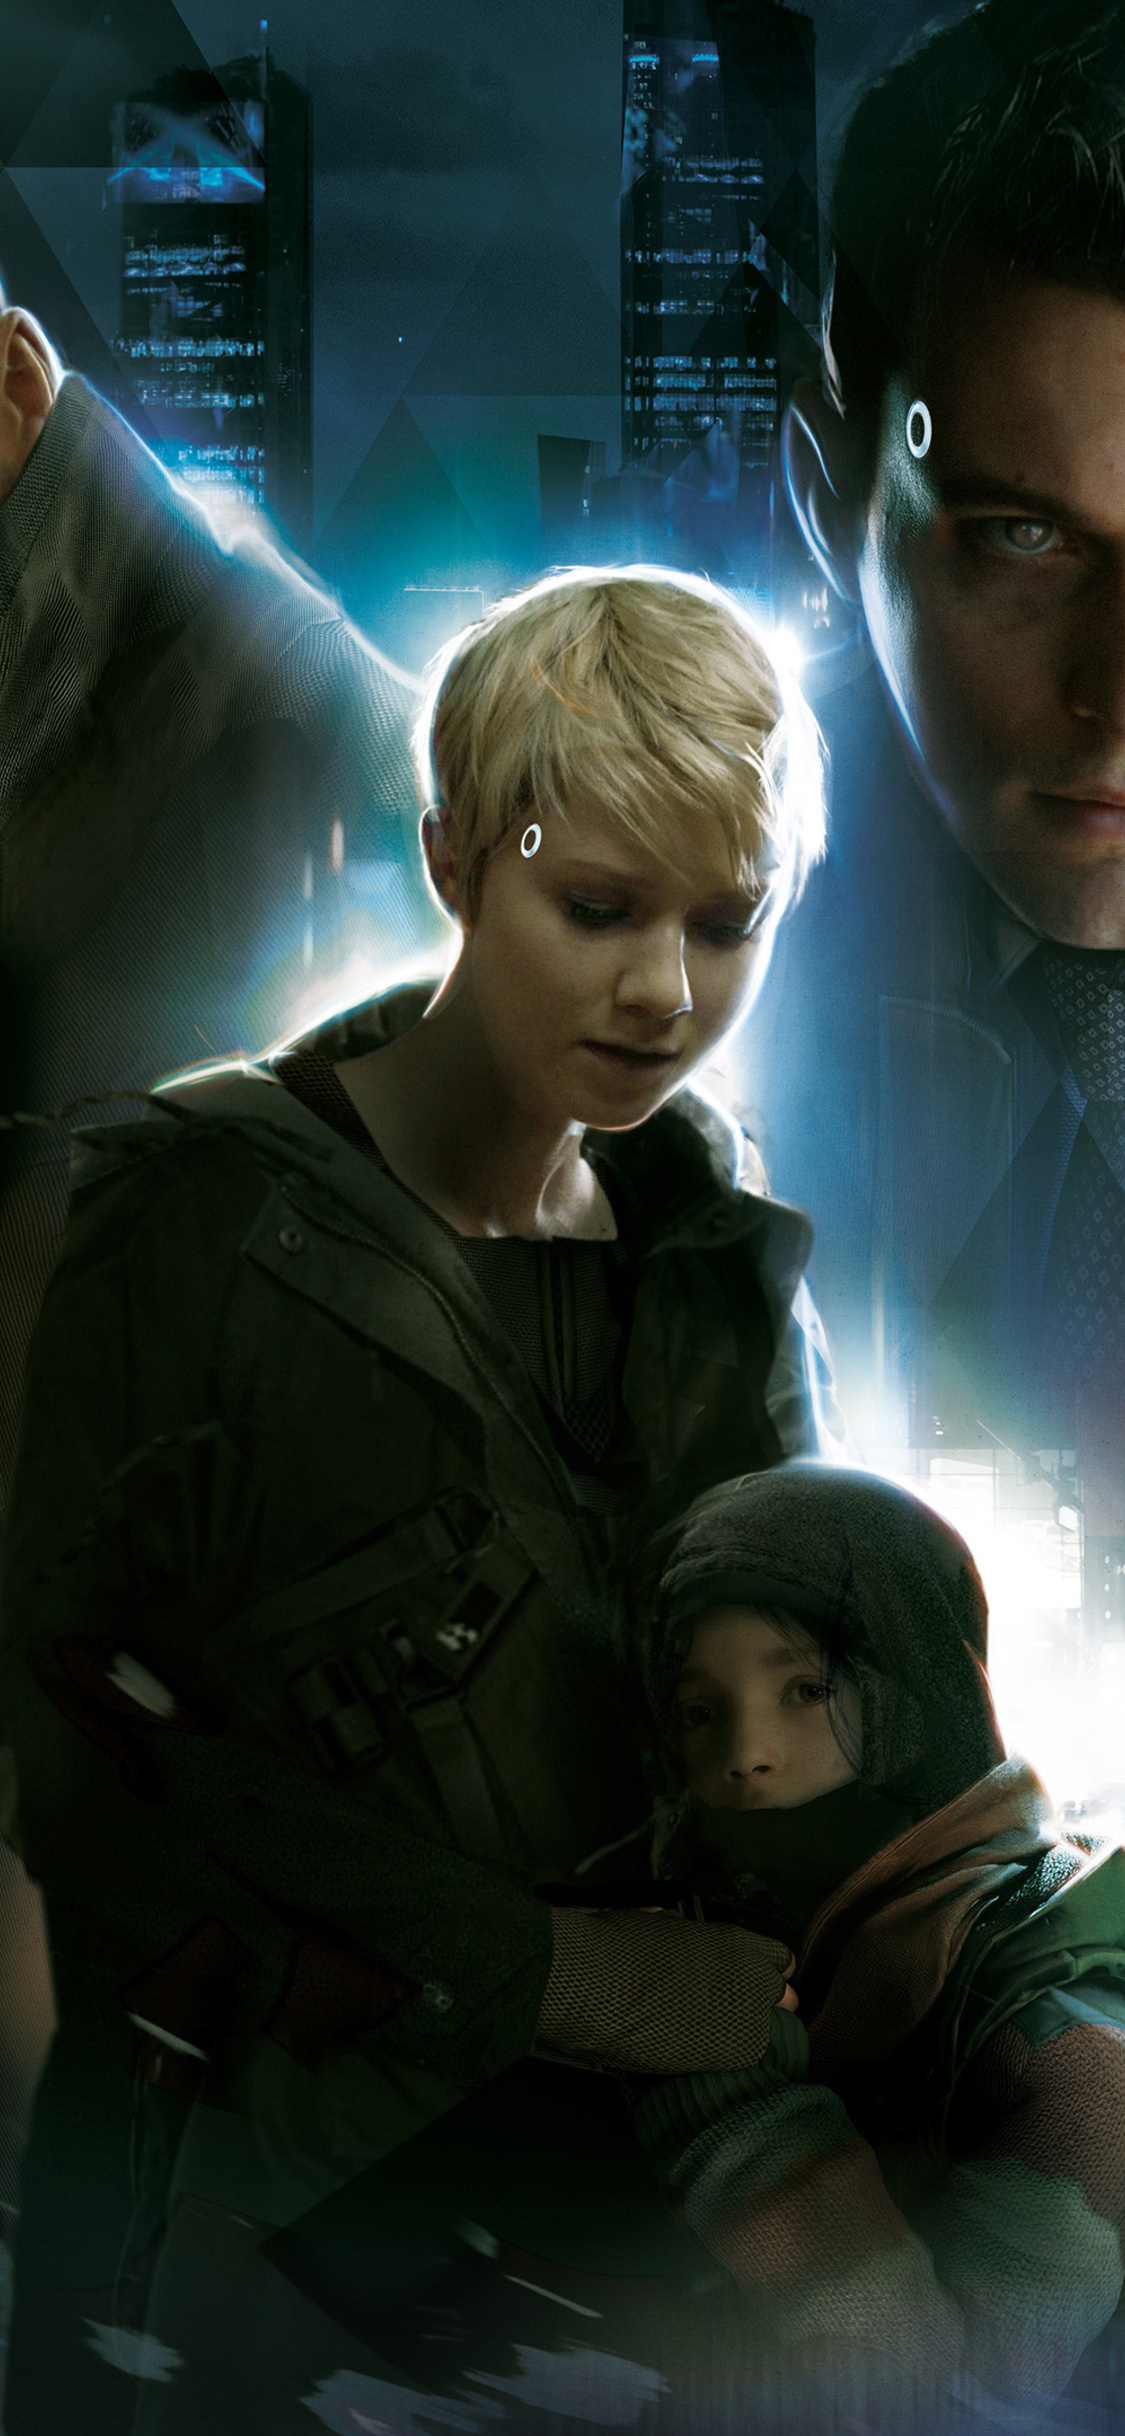 1125x2436 Detroit Become Human 2018 Video Game 4k Iphone Xsiphone